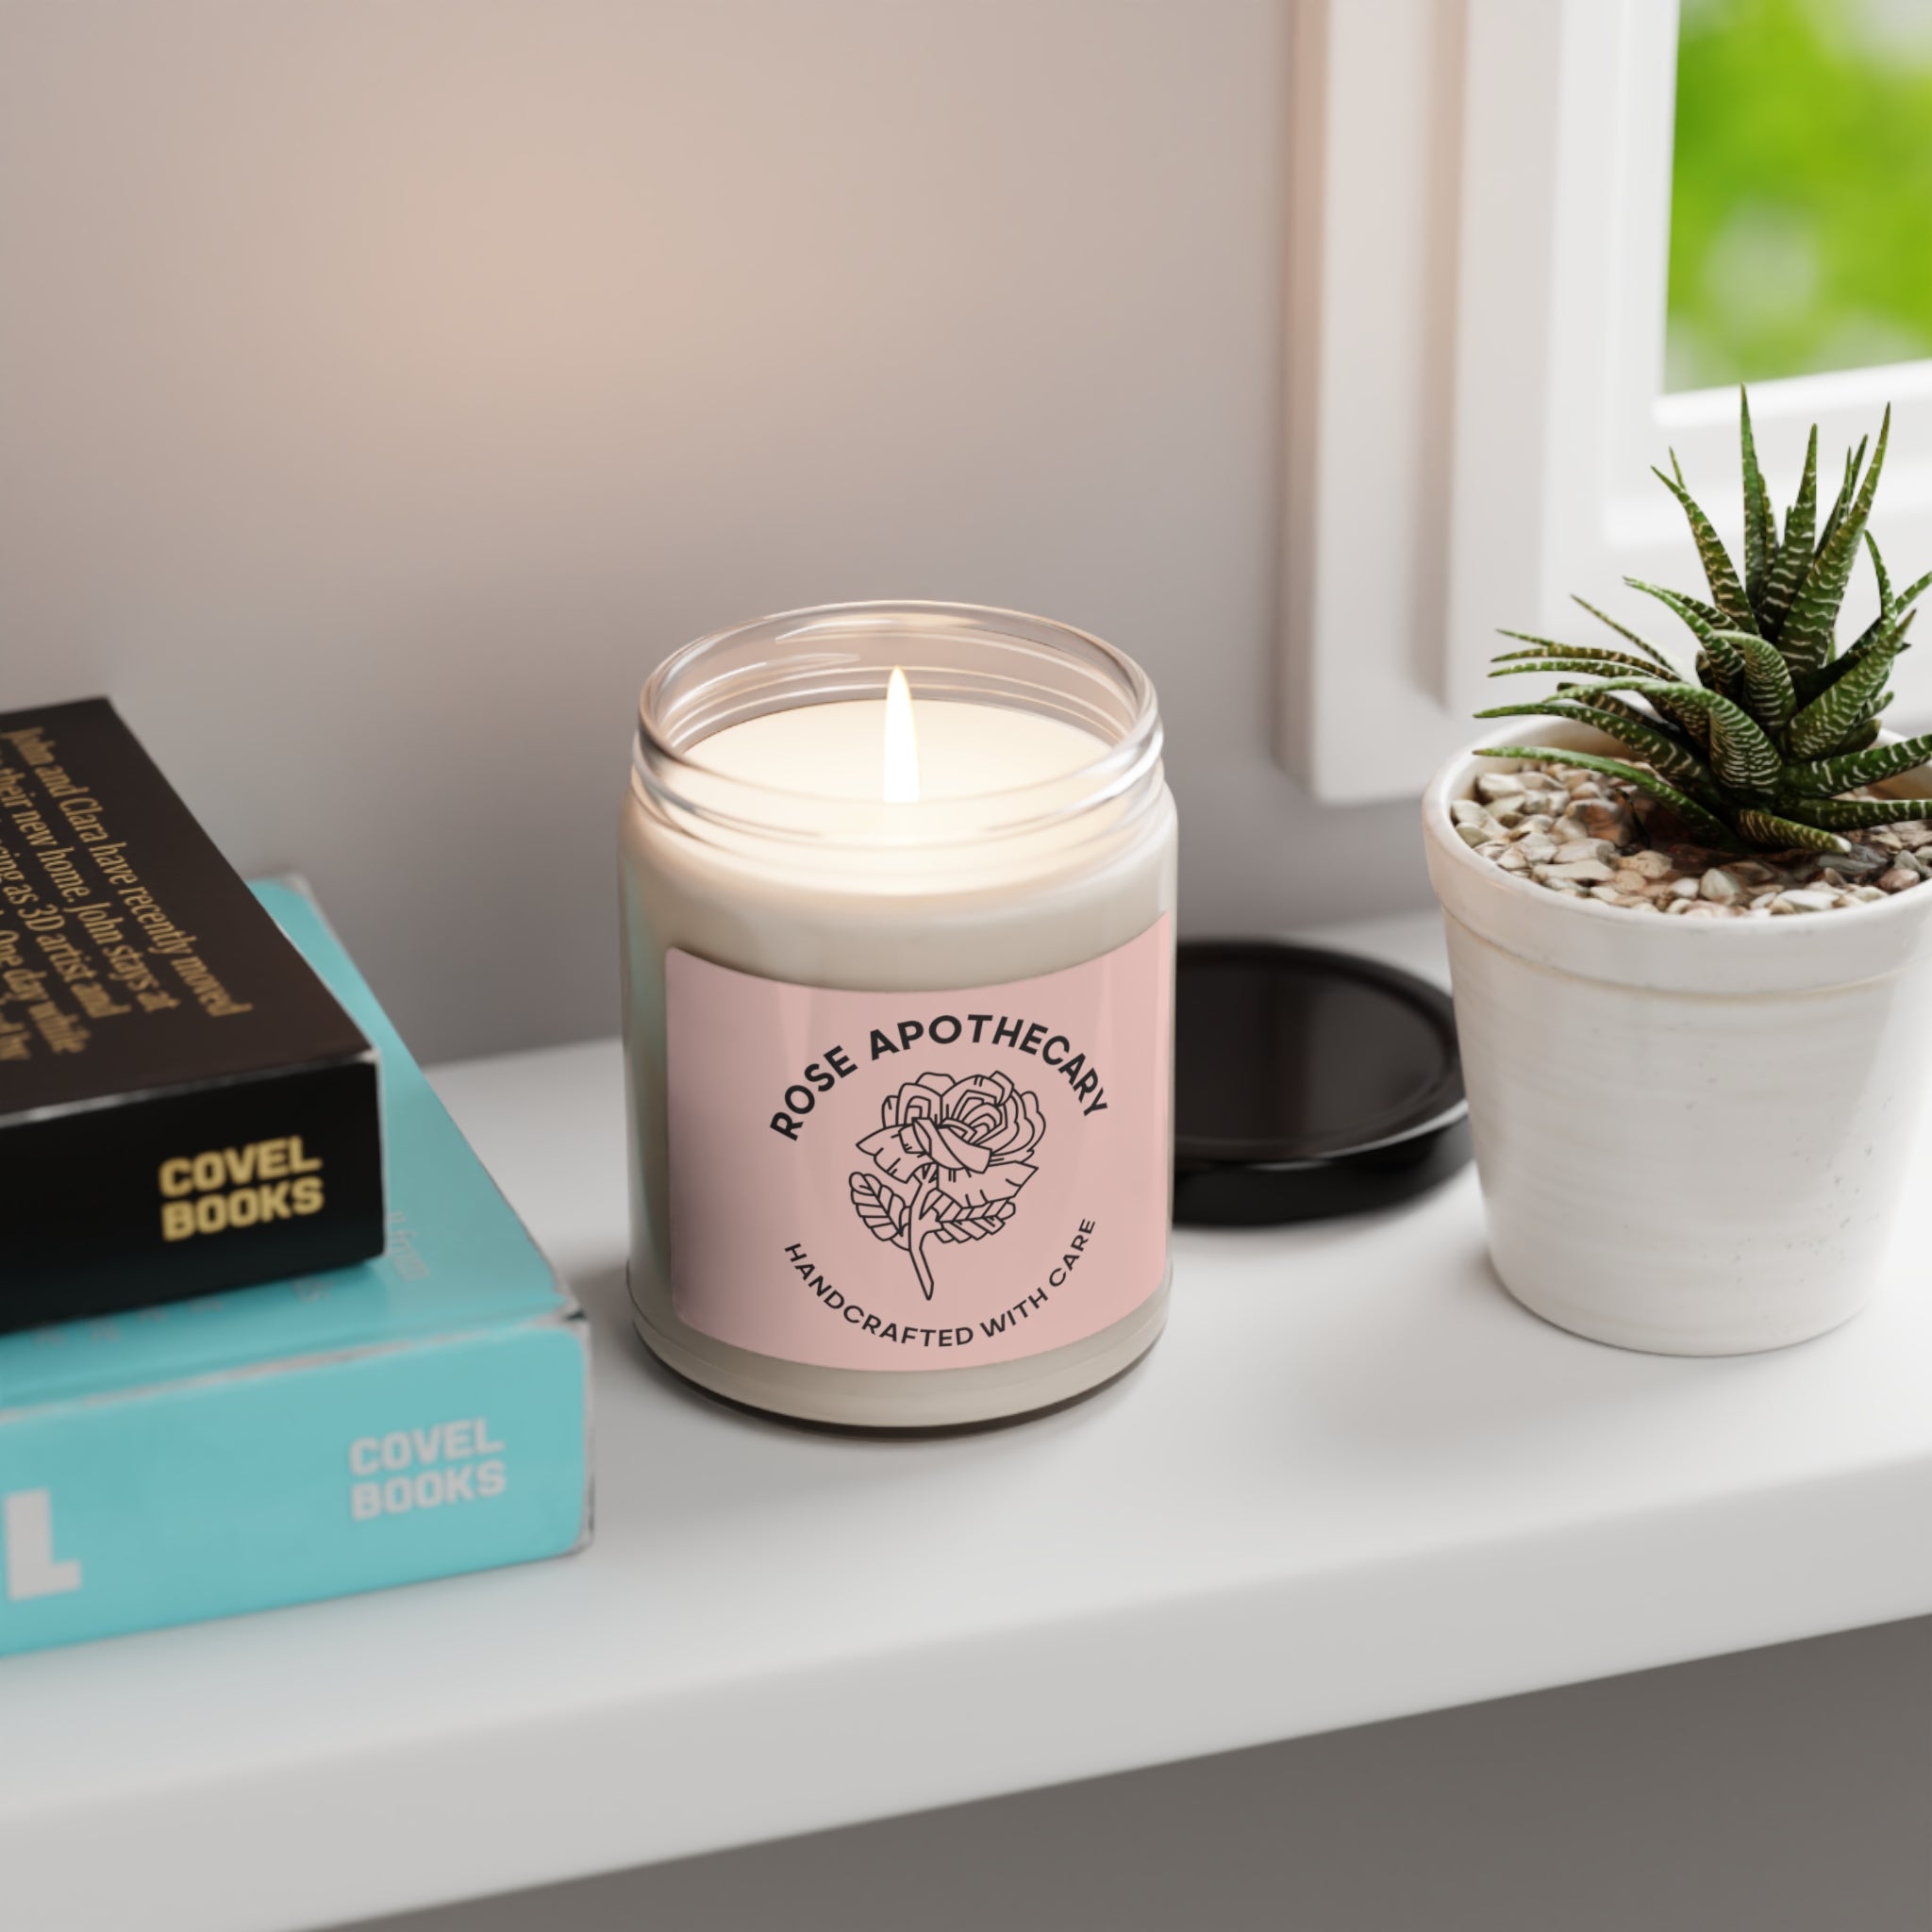 Schitt's Creek Rose Apothecary Scented Soy Candle